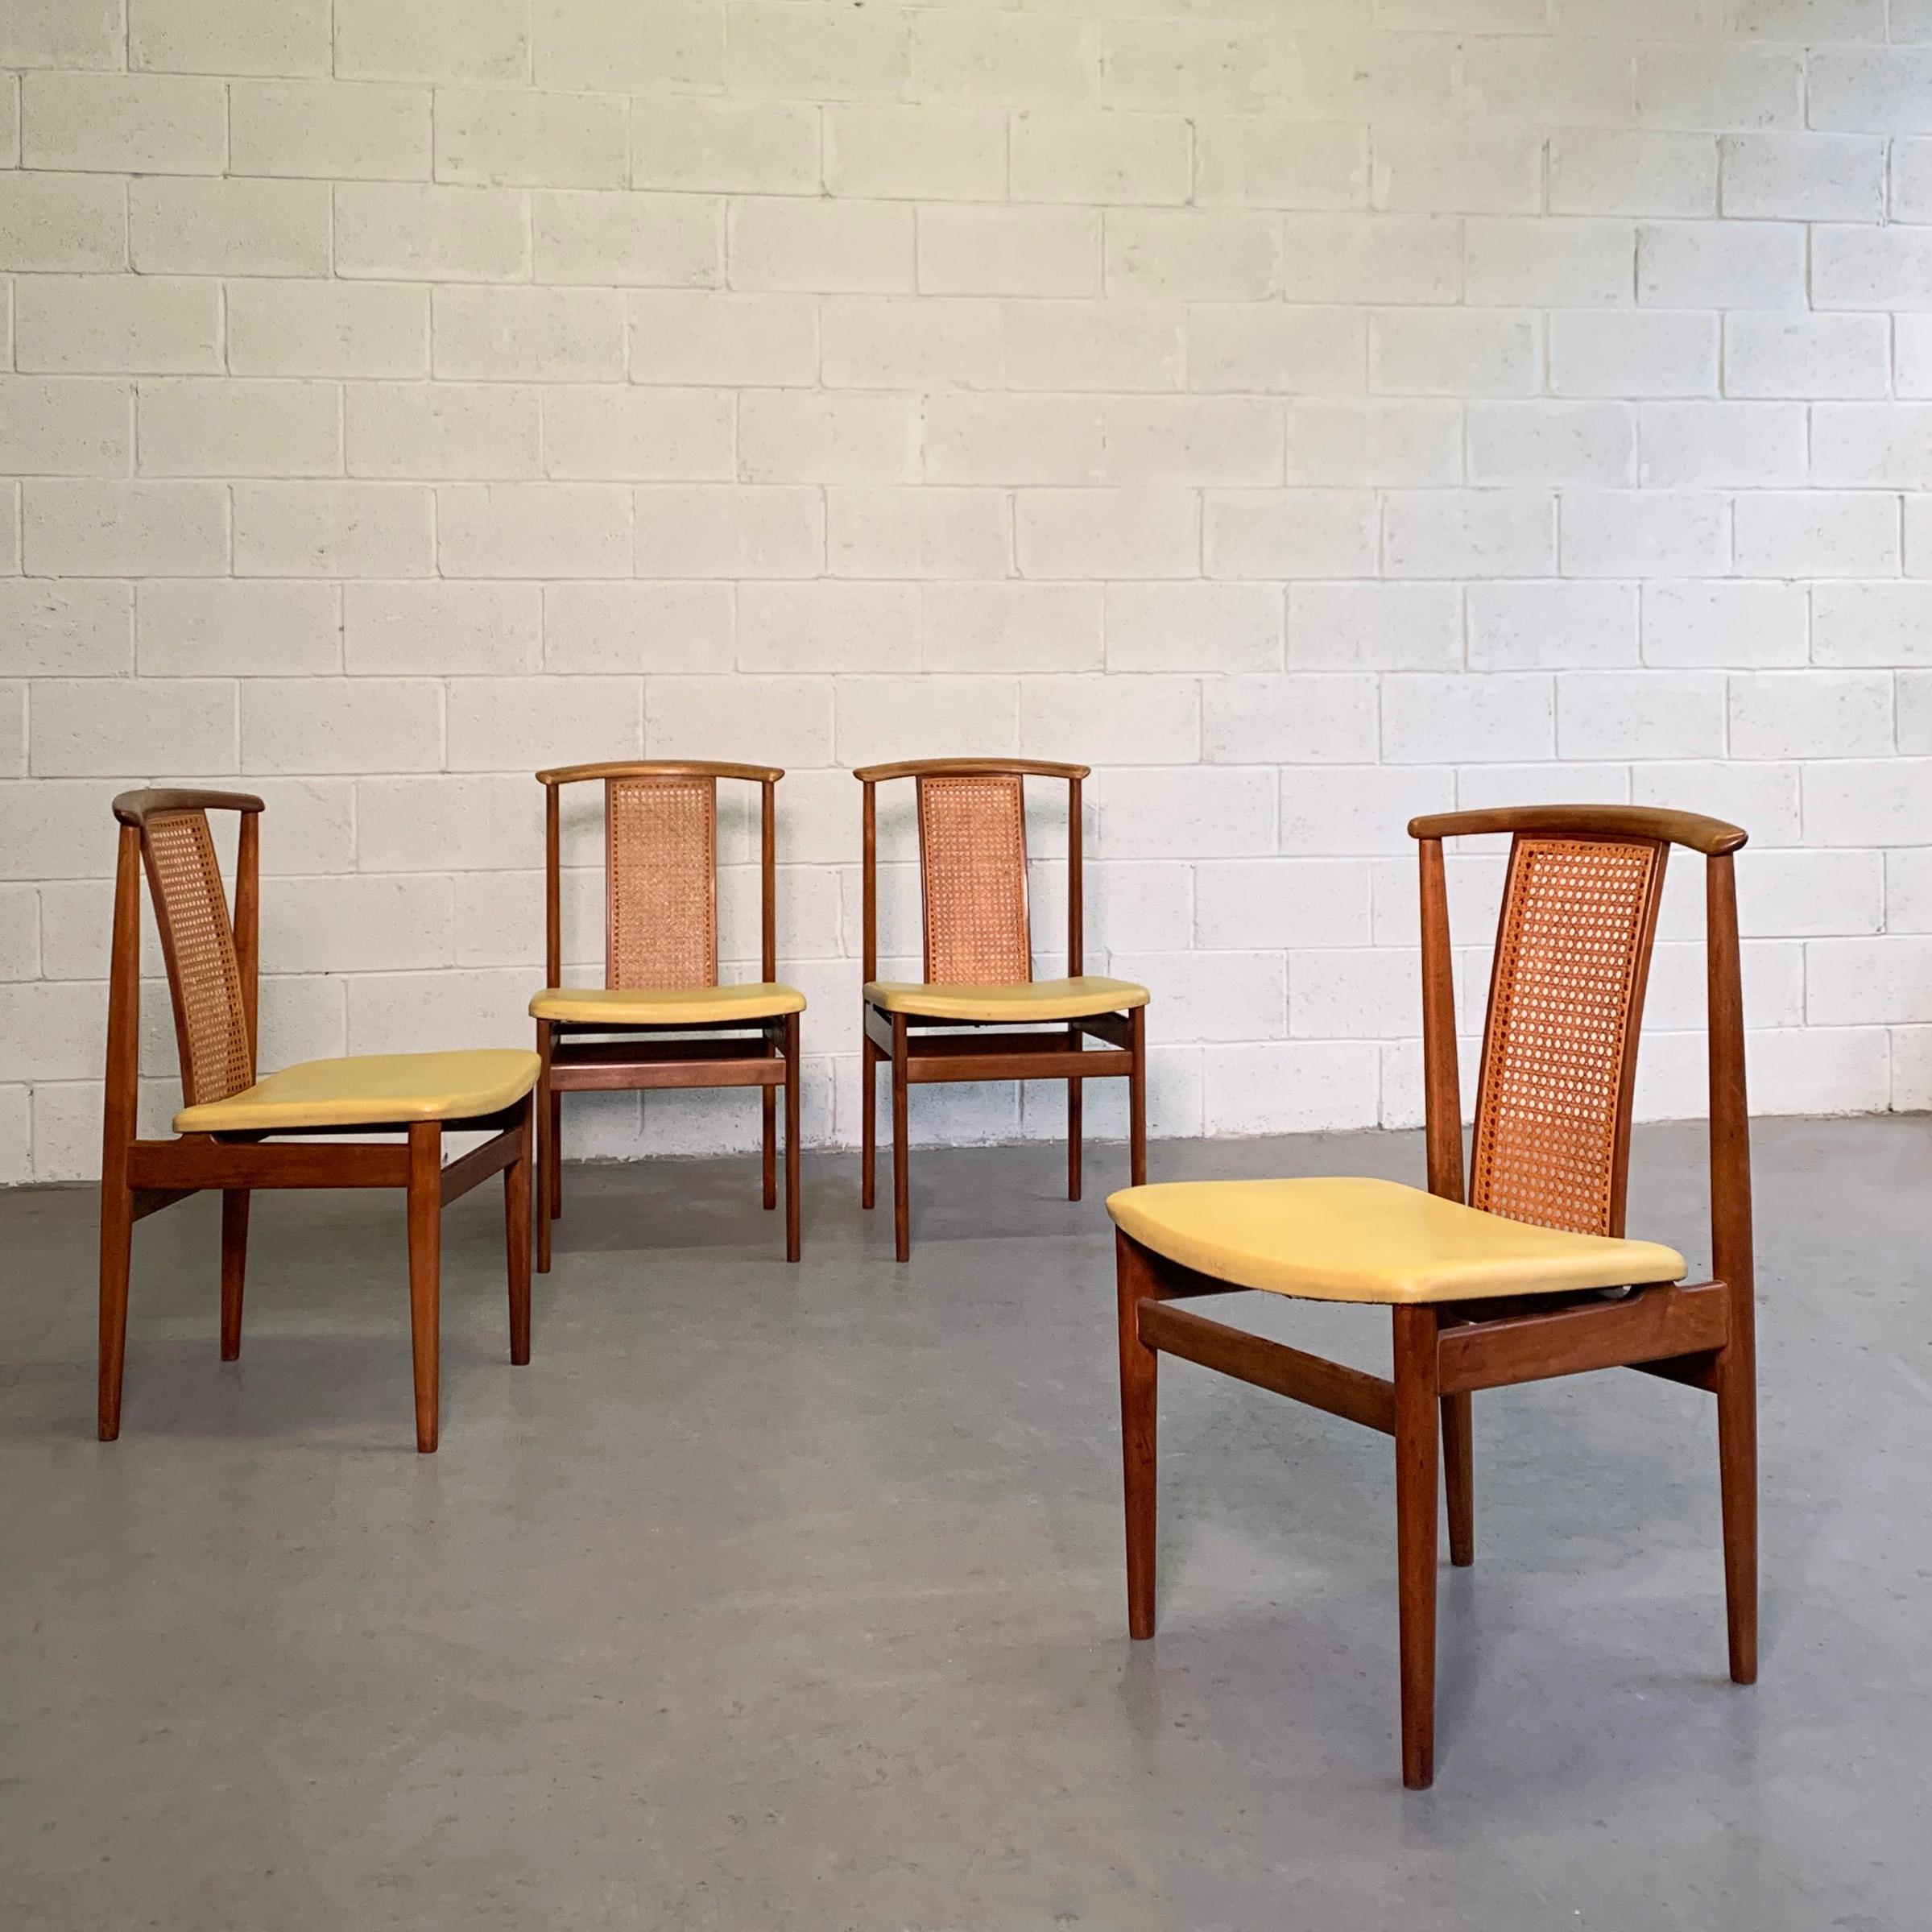 Set of 4 Danish modern, teak dining chairs feature high sculpted backs with cane detail and vinyl upholstered seats.